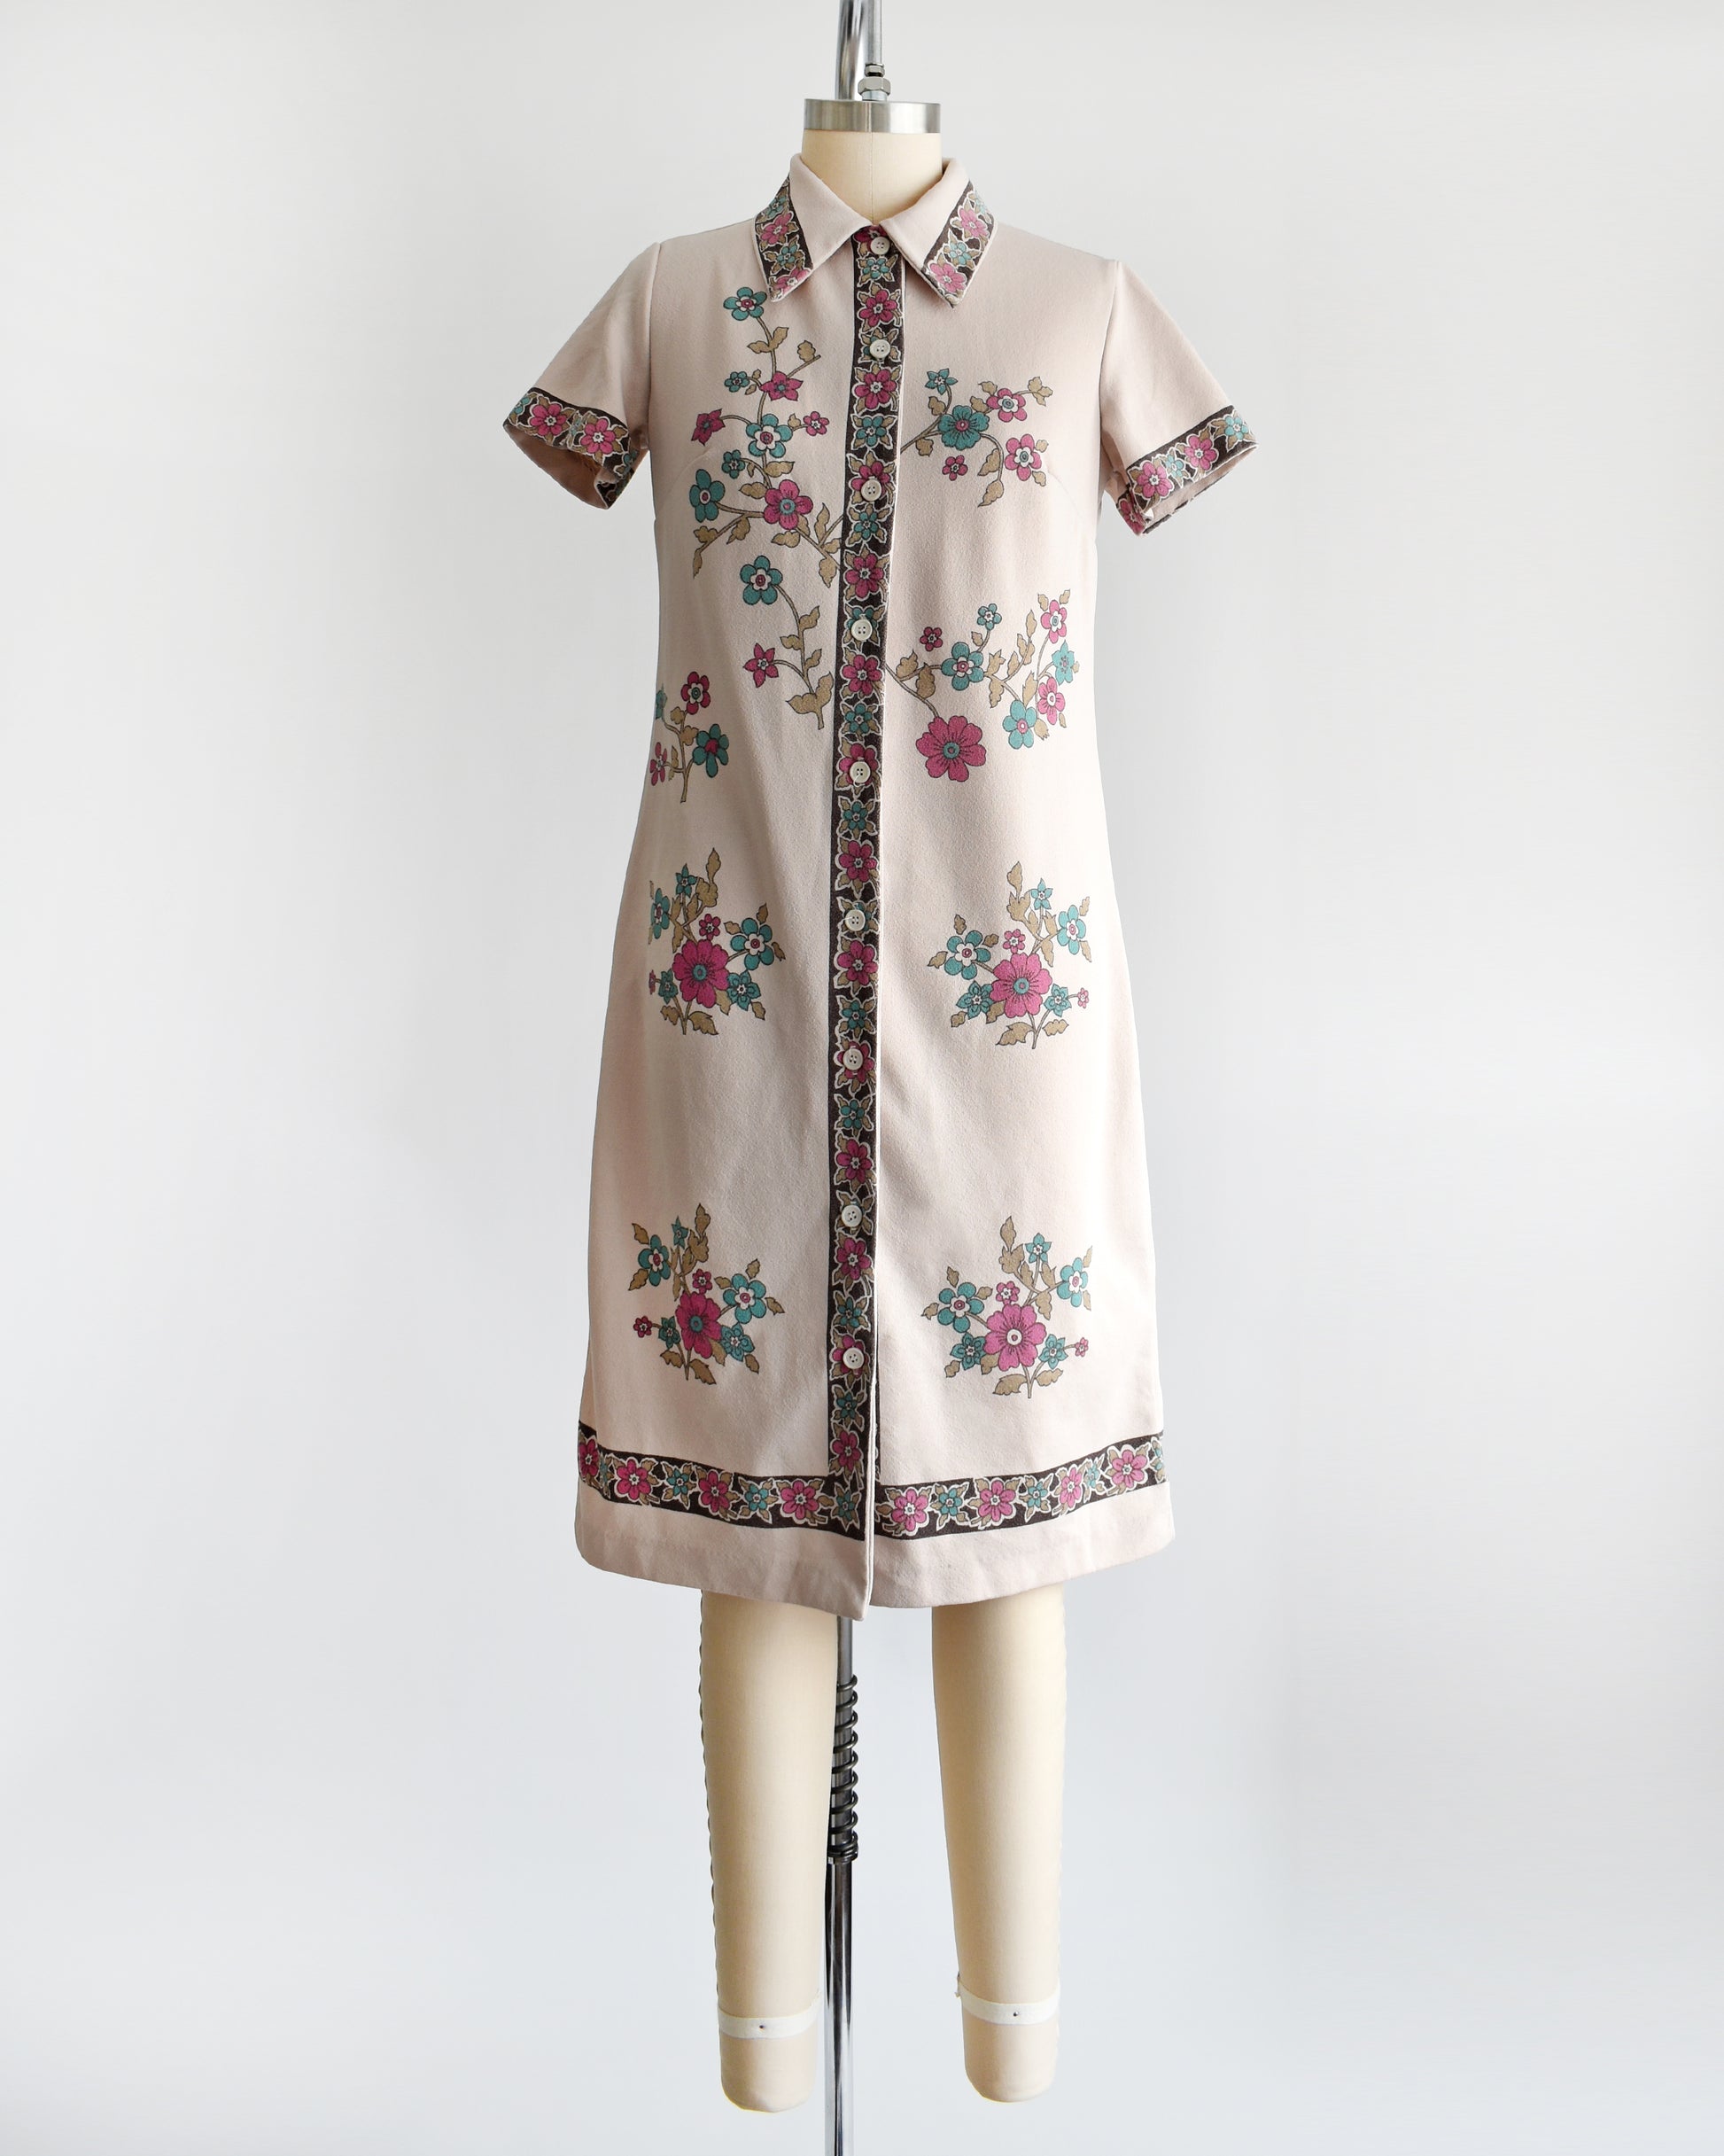 A vintage 1970s light brown mod dress with button front that features a blue and pink floral print 